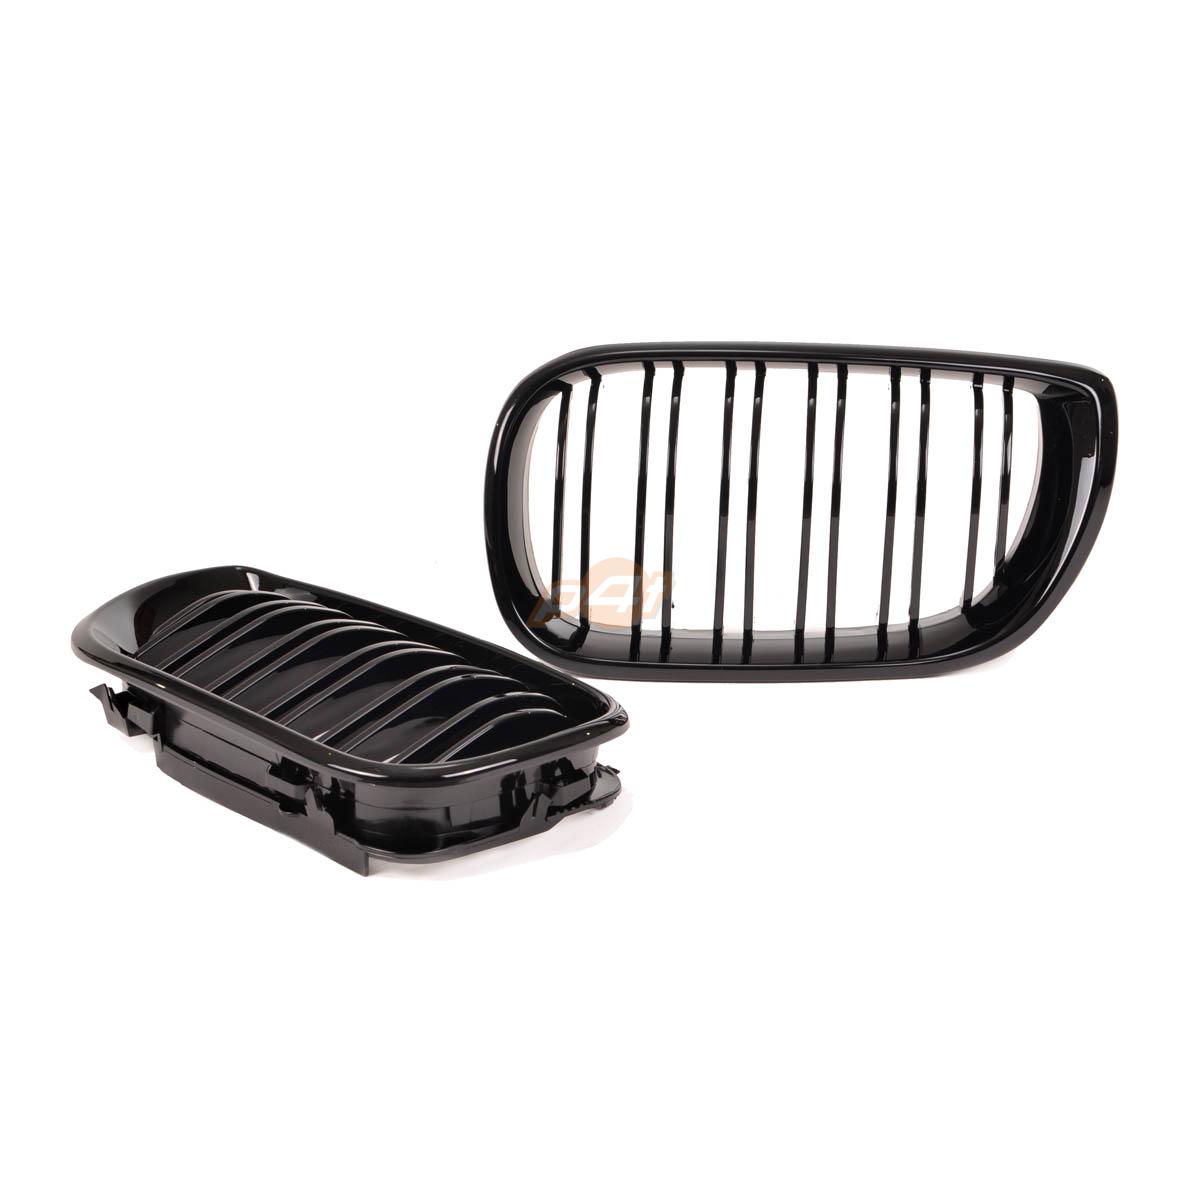 Sport Grille Dual Line Gloss Black suitable for BMW 3 (E46) Sedan Compact  Touring Facelift 2001-2005 